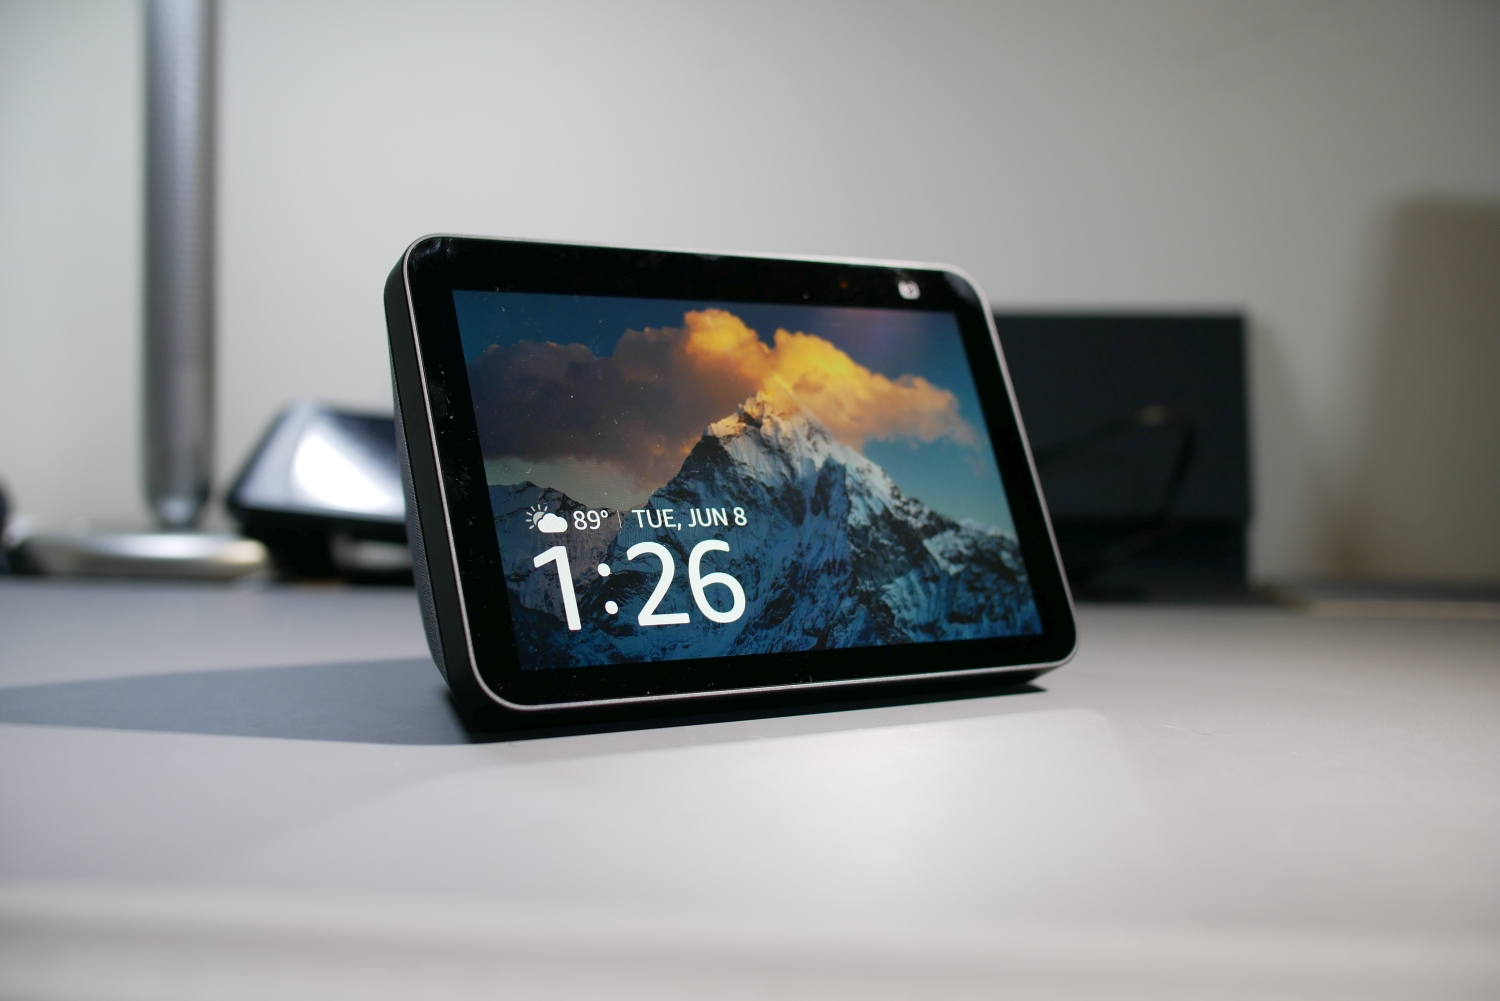  All-new Echo Show 5 (3rd Gen, 2023 release), Smart display  with deeper bass and clearer sound, International Version with US Power  Adaptor